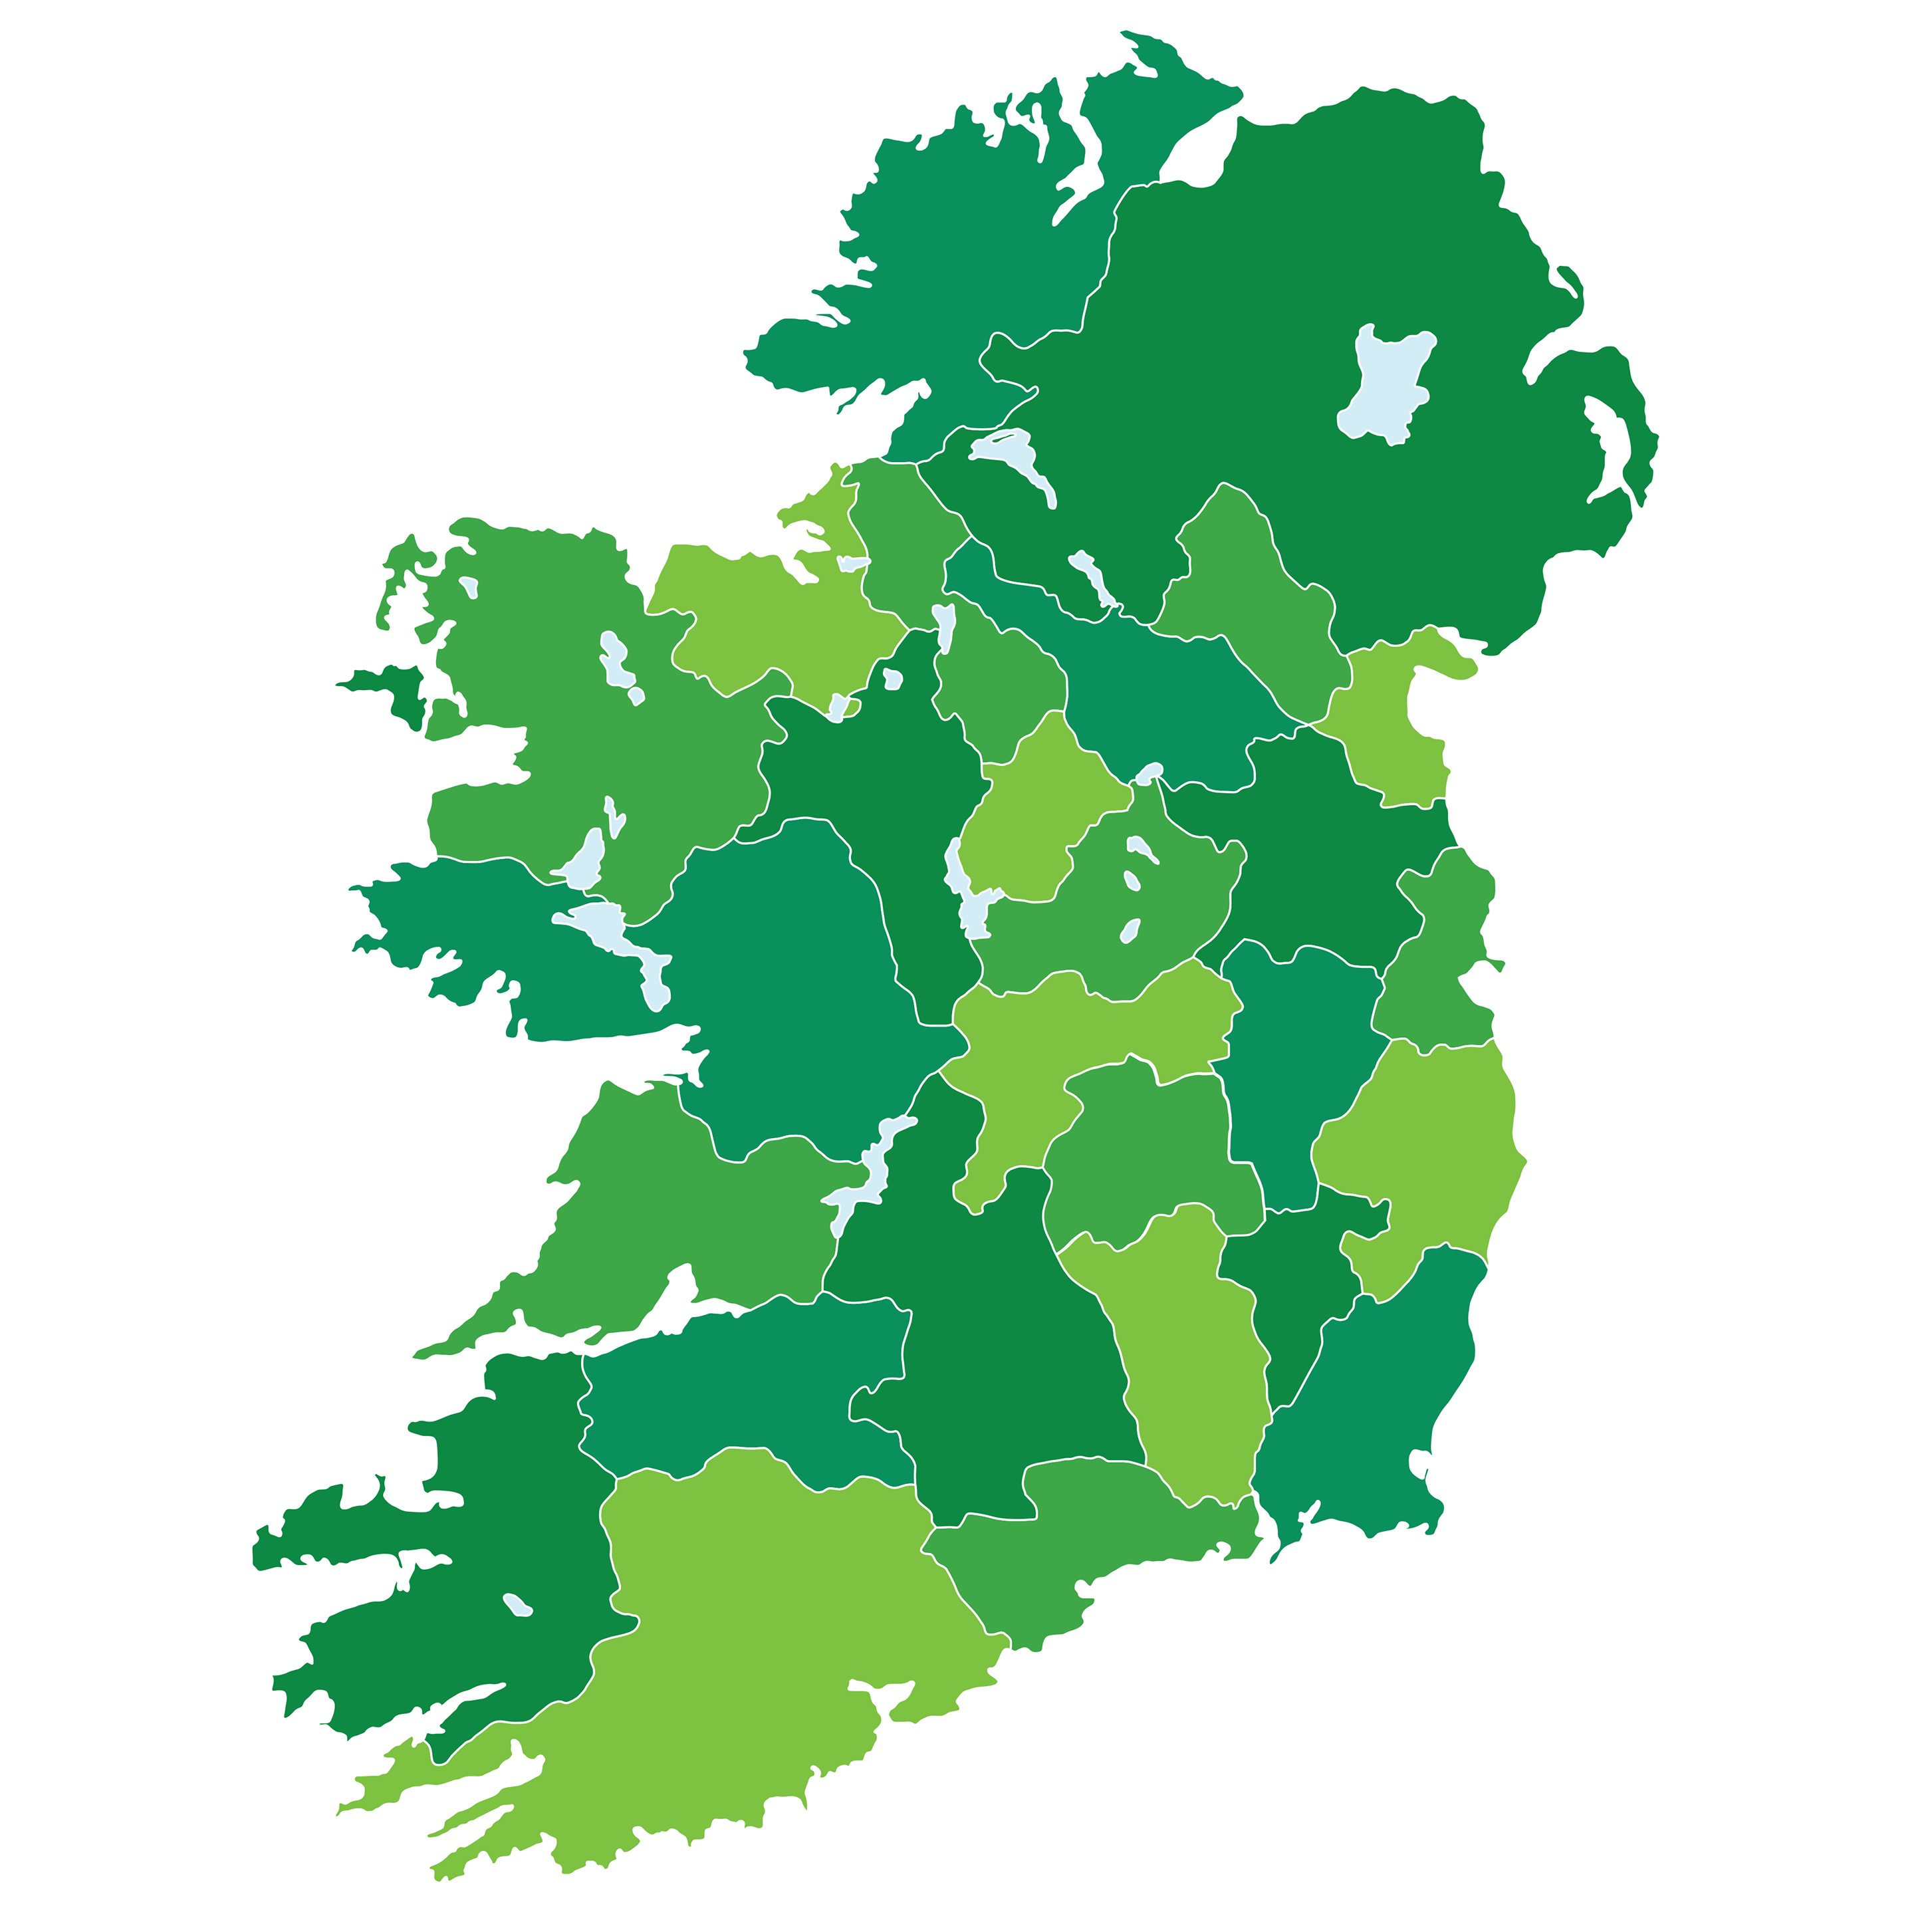 The country of Ireland